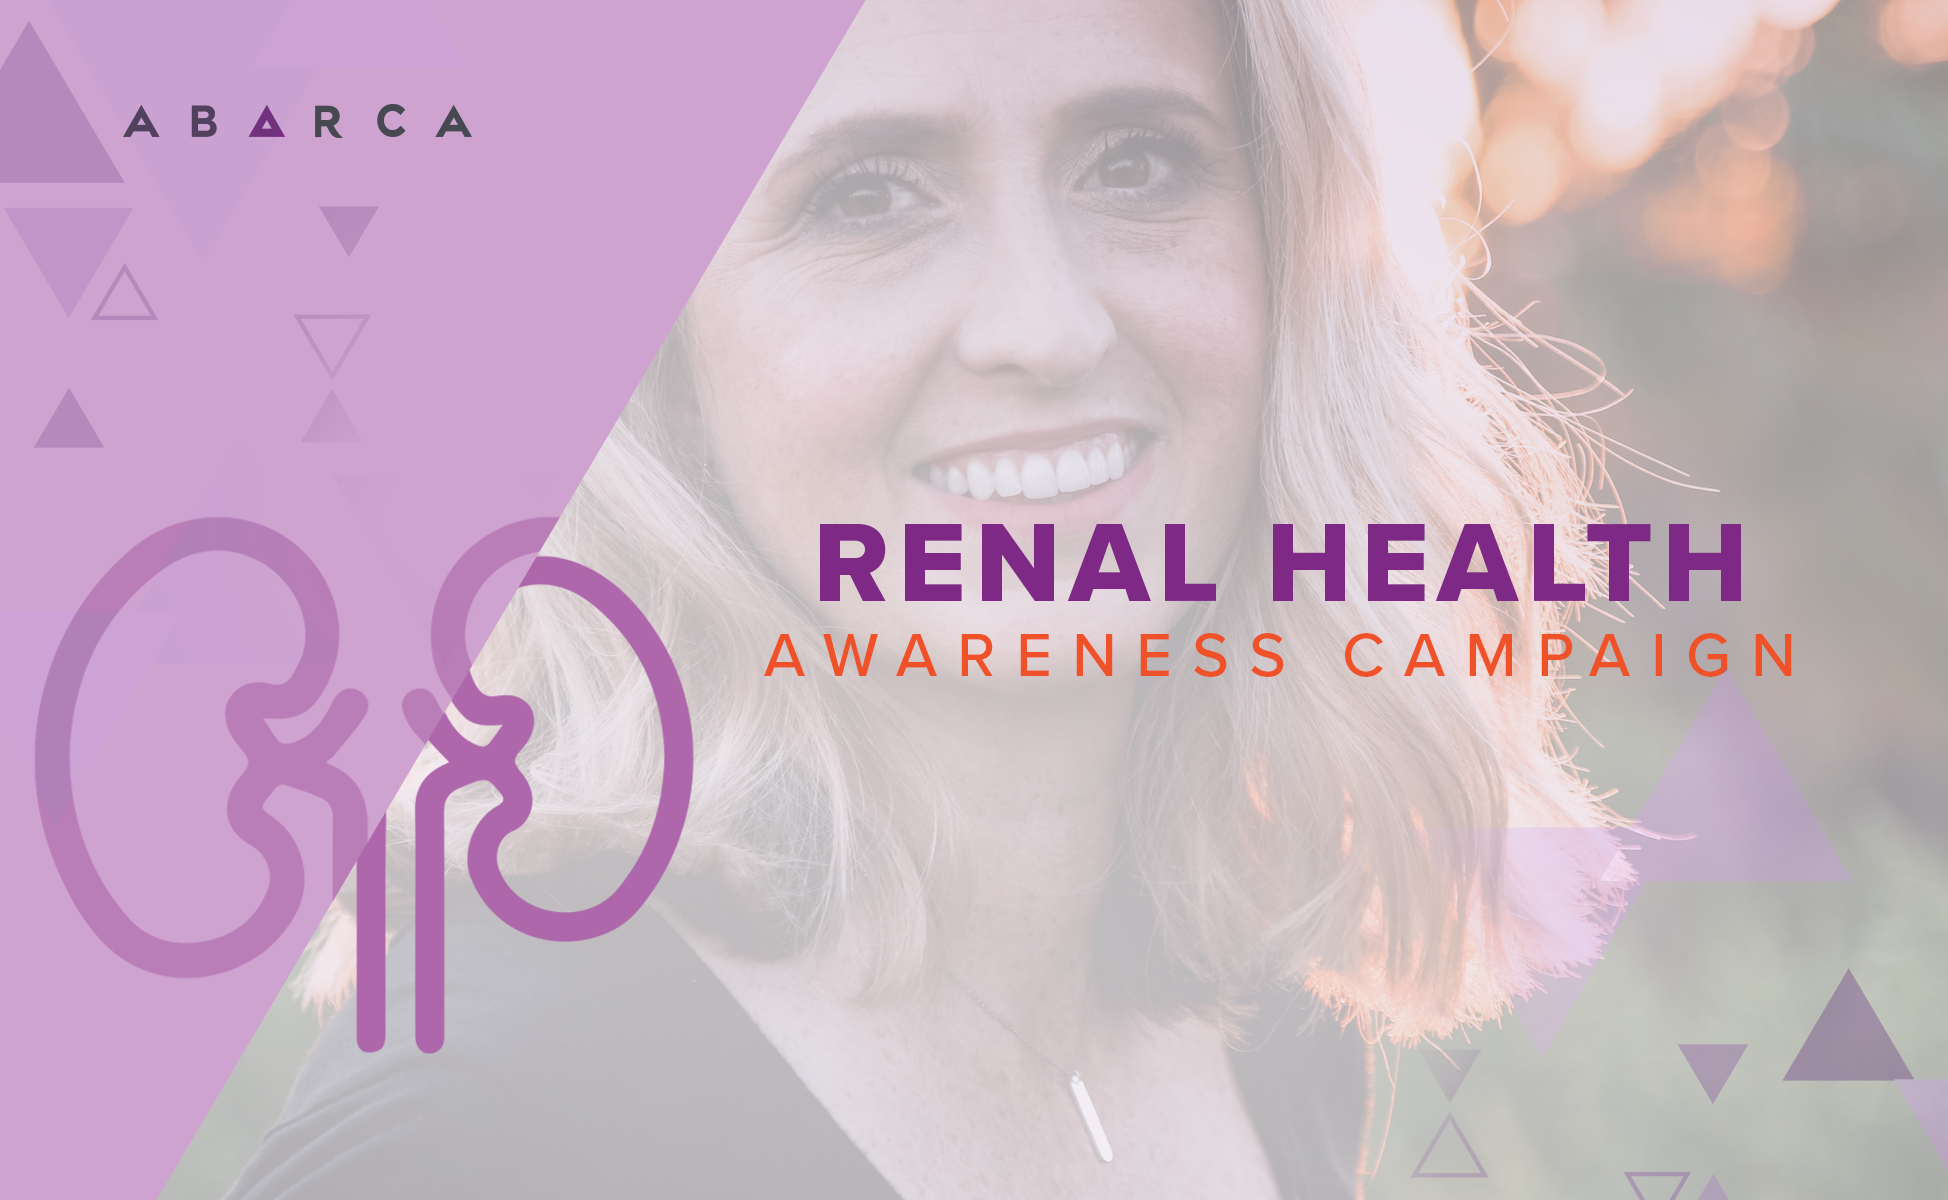 Abarca's Renal Health Awareness Campaign as part of the Better Care Community Program